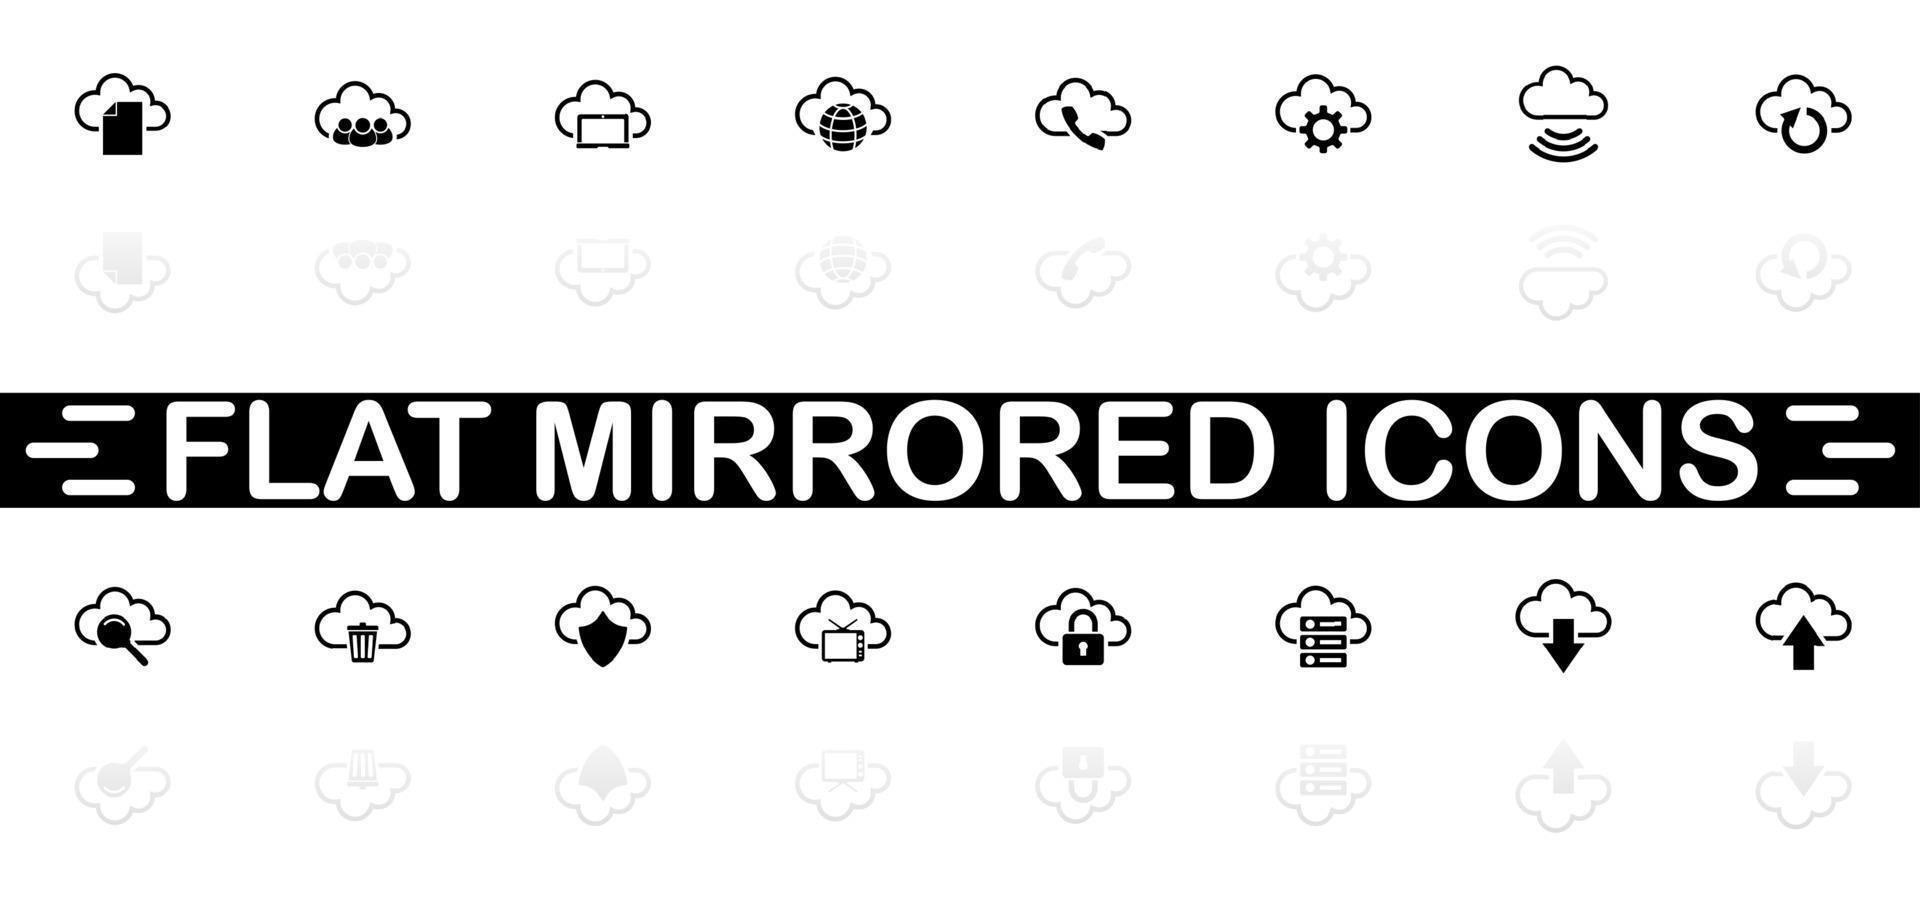 Computer Cloud icons - Black symbol on white background. Simple illustration. Flat Vector Icon. Mirror Reflection Shadow. Can be used in logo, web, mobile and UI UX project.